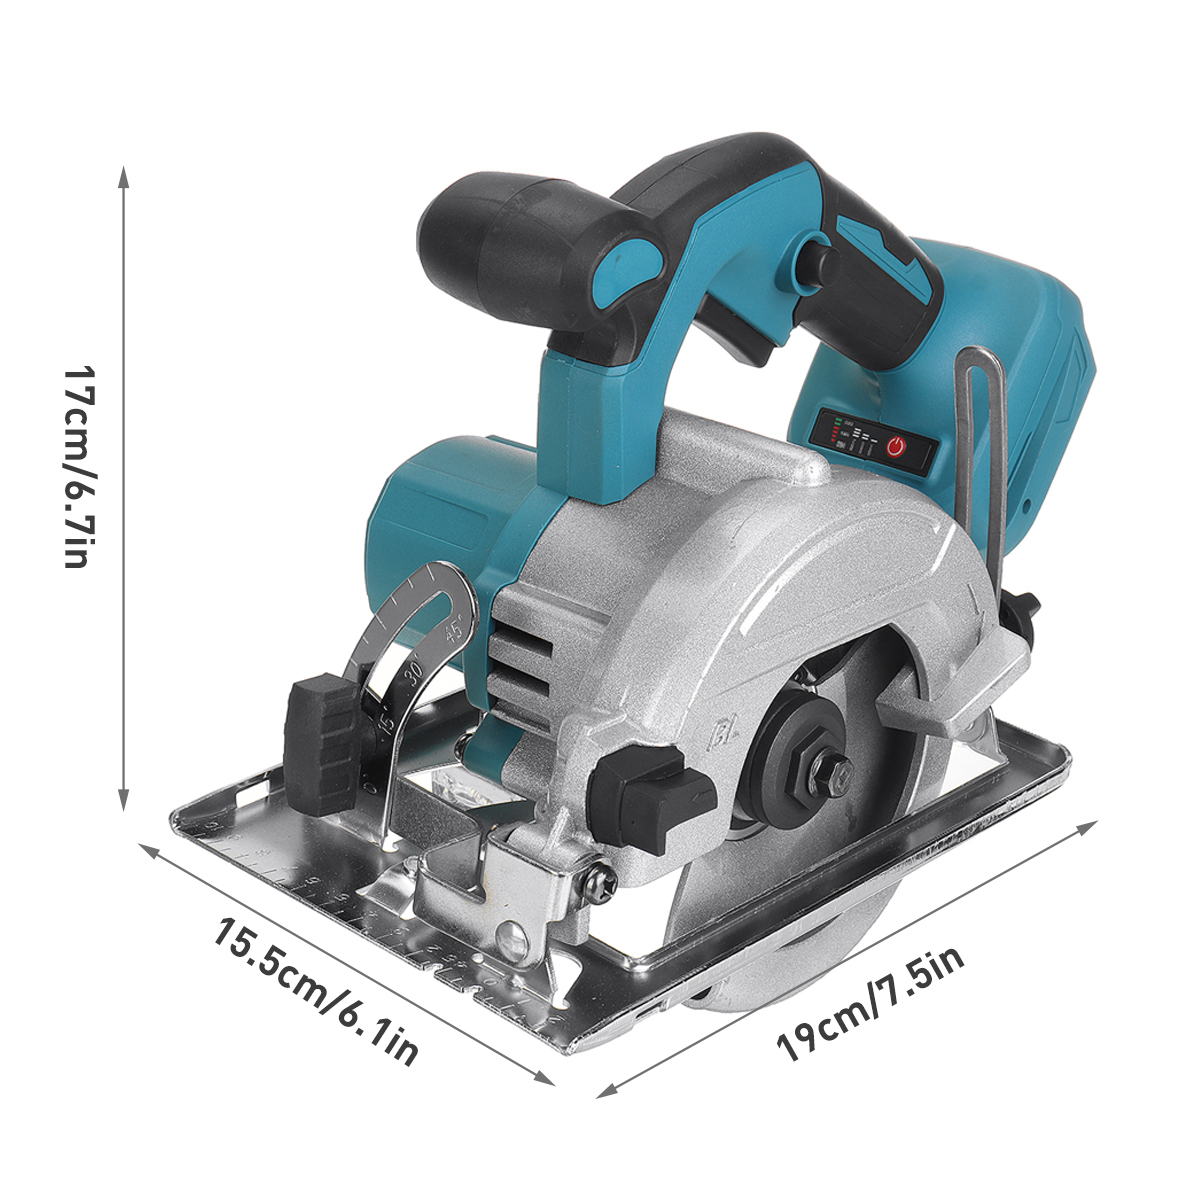 125mm-Wireless-Brushless-Electric-Circular-Saw-Rechargeable-Metal-Wood-Plastic-Stone-Cutting-Tool-fo-1880978-12